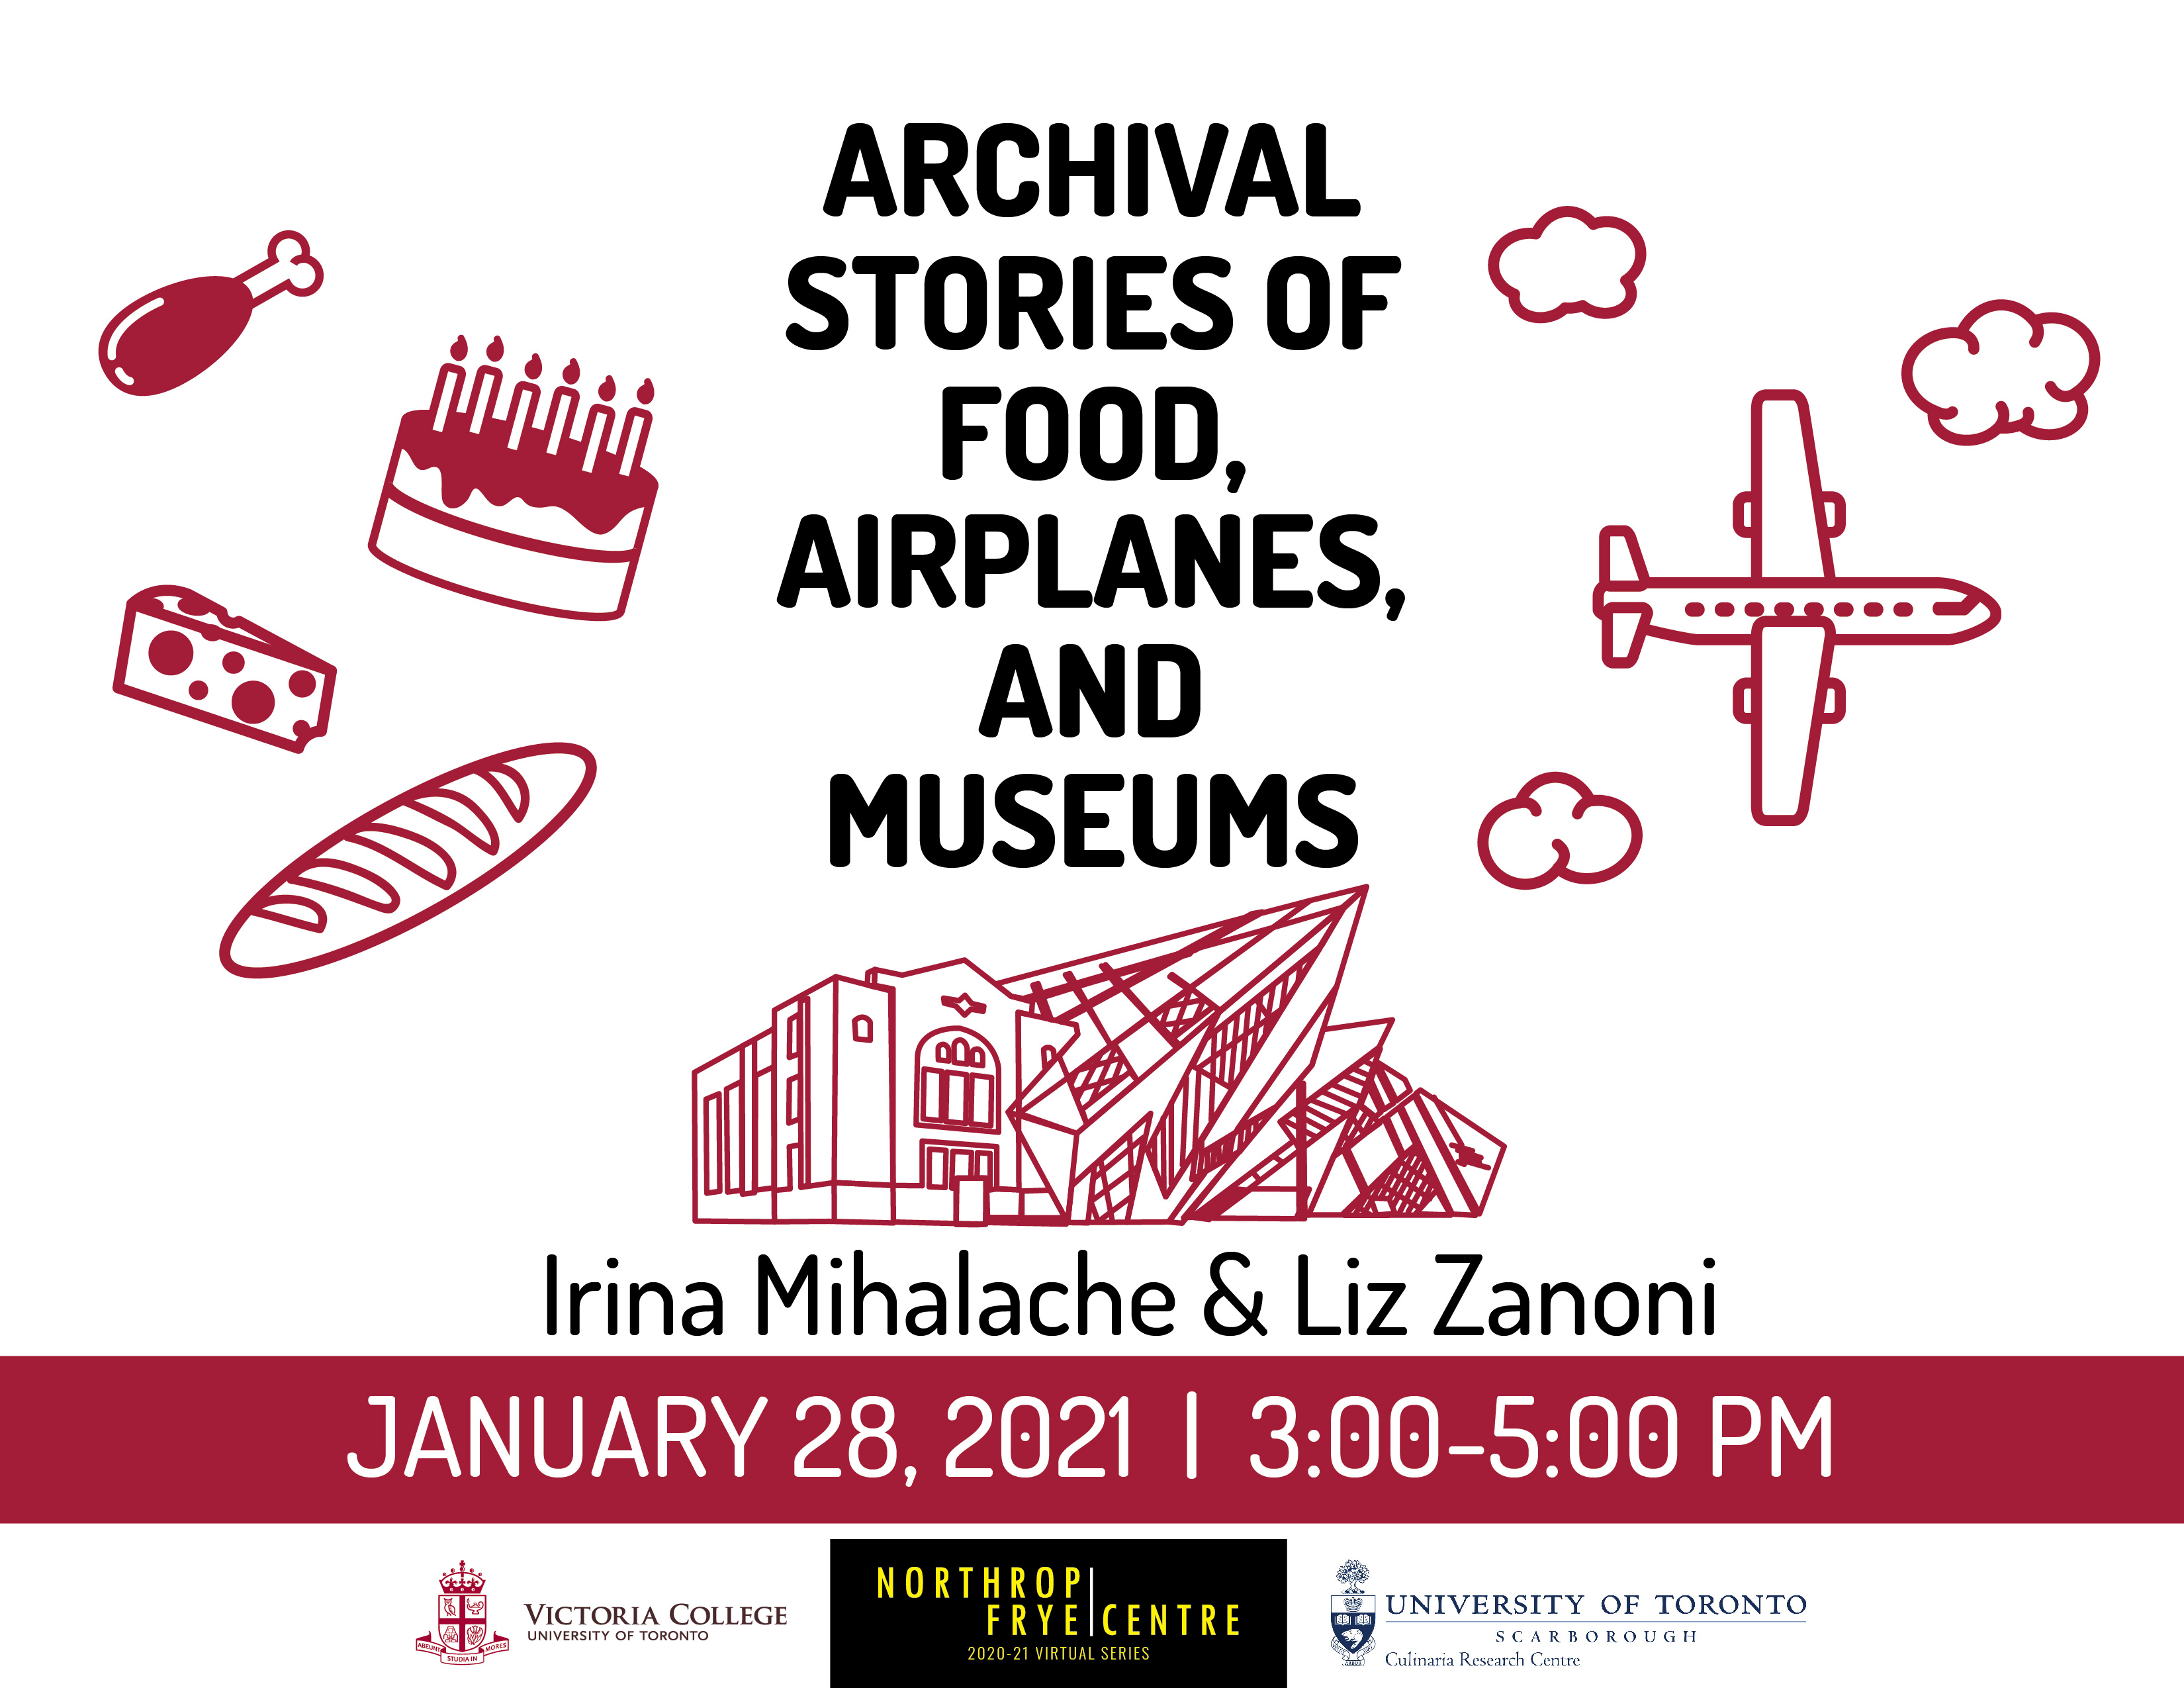 Jan. 28, 2021 | Archival Stories of Food, Airplanes, and Museums | Mihalache, Zanoni